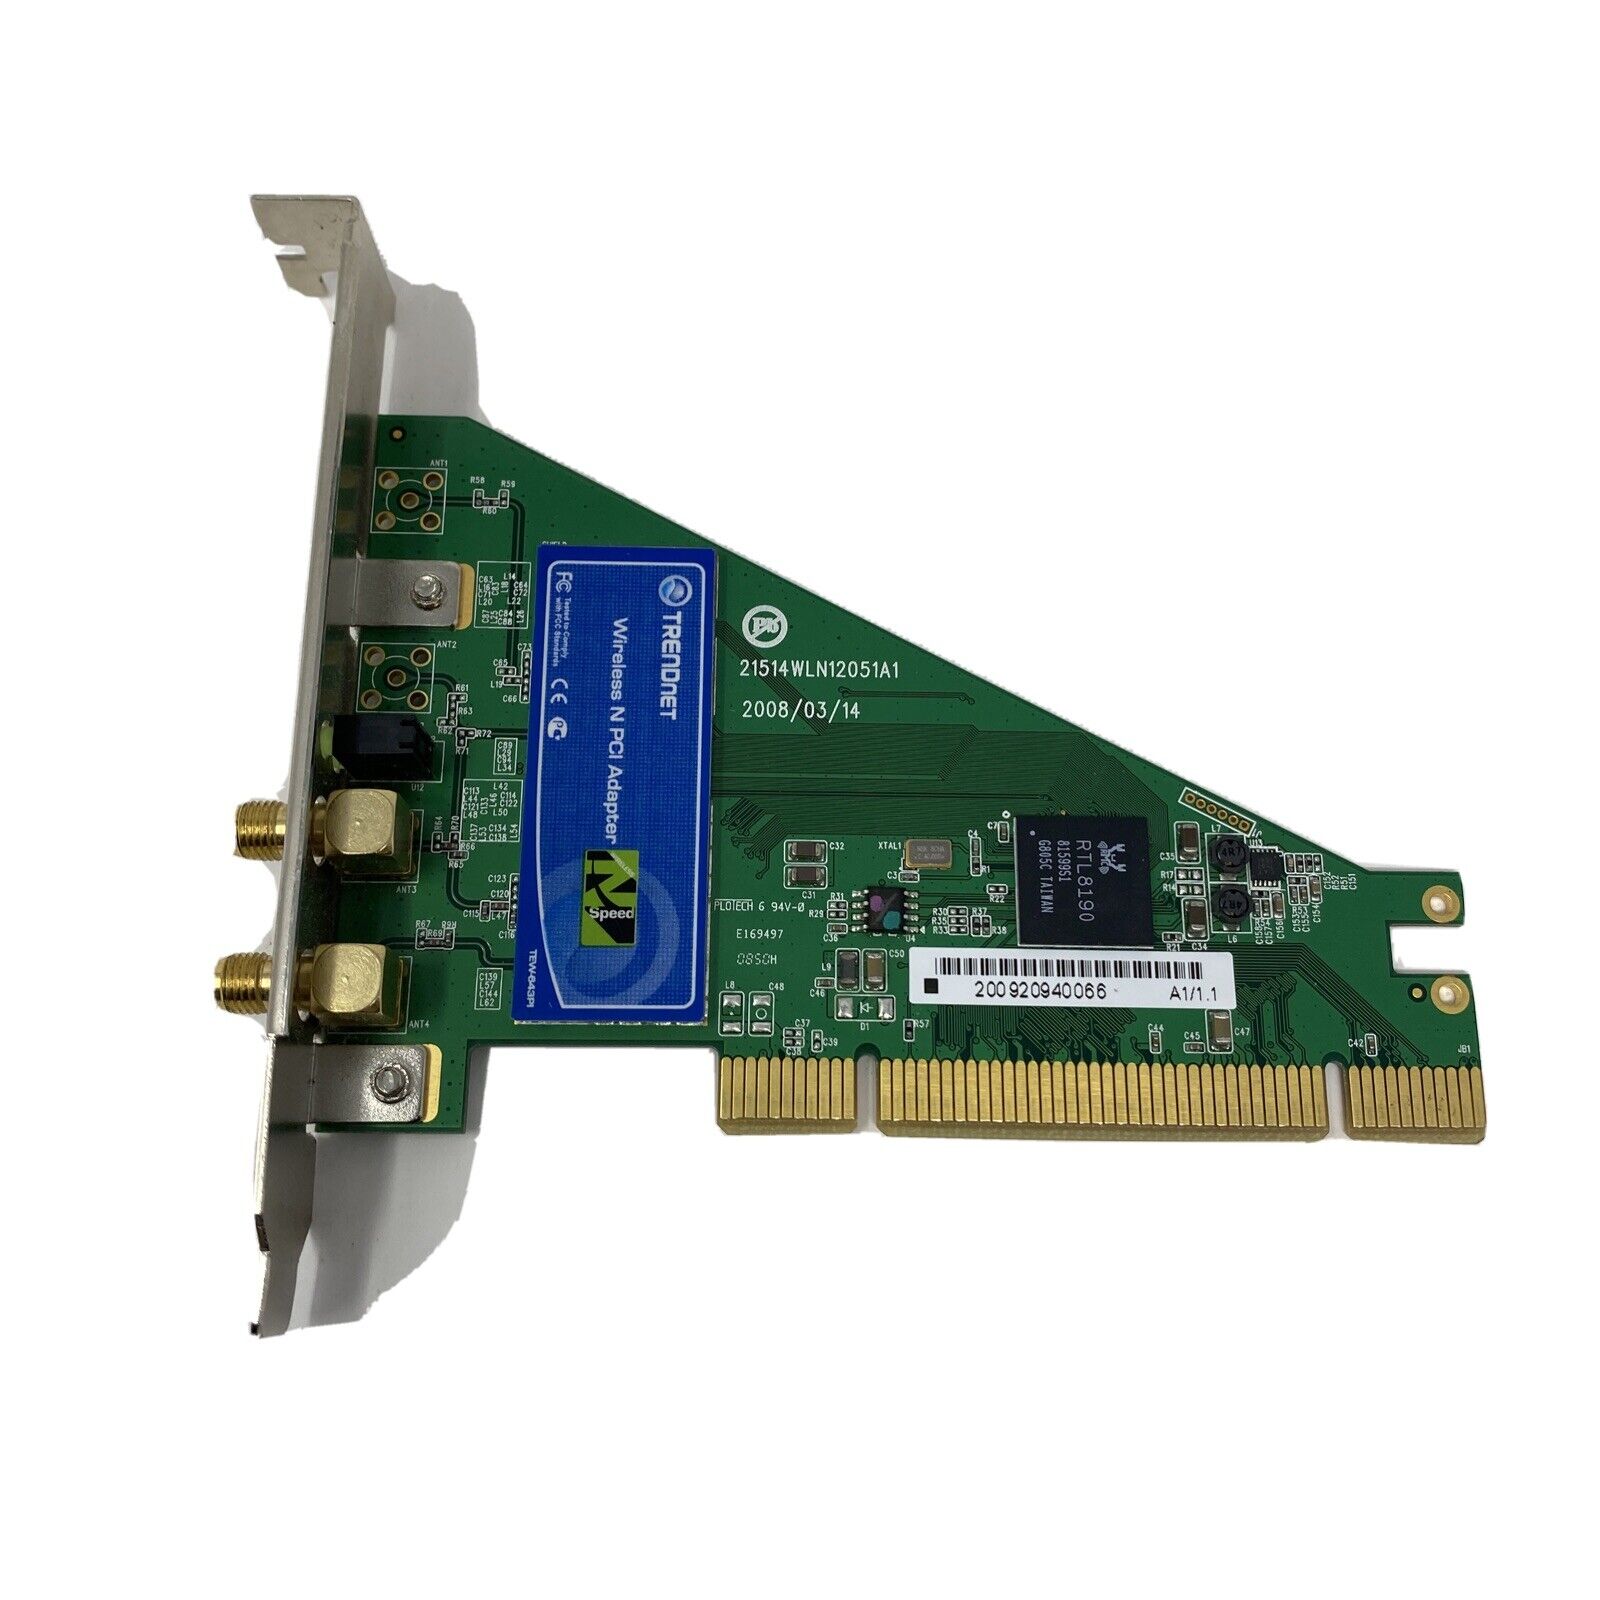 TRENDnet Wireless N PCI Adapter Card- TEW-643PI/A